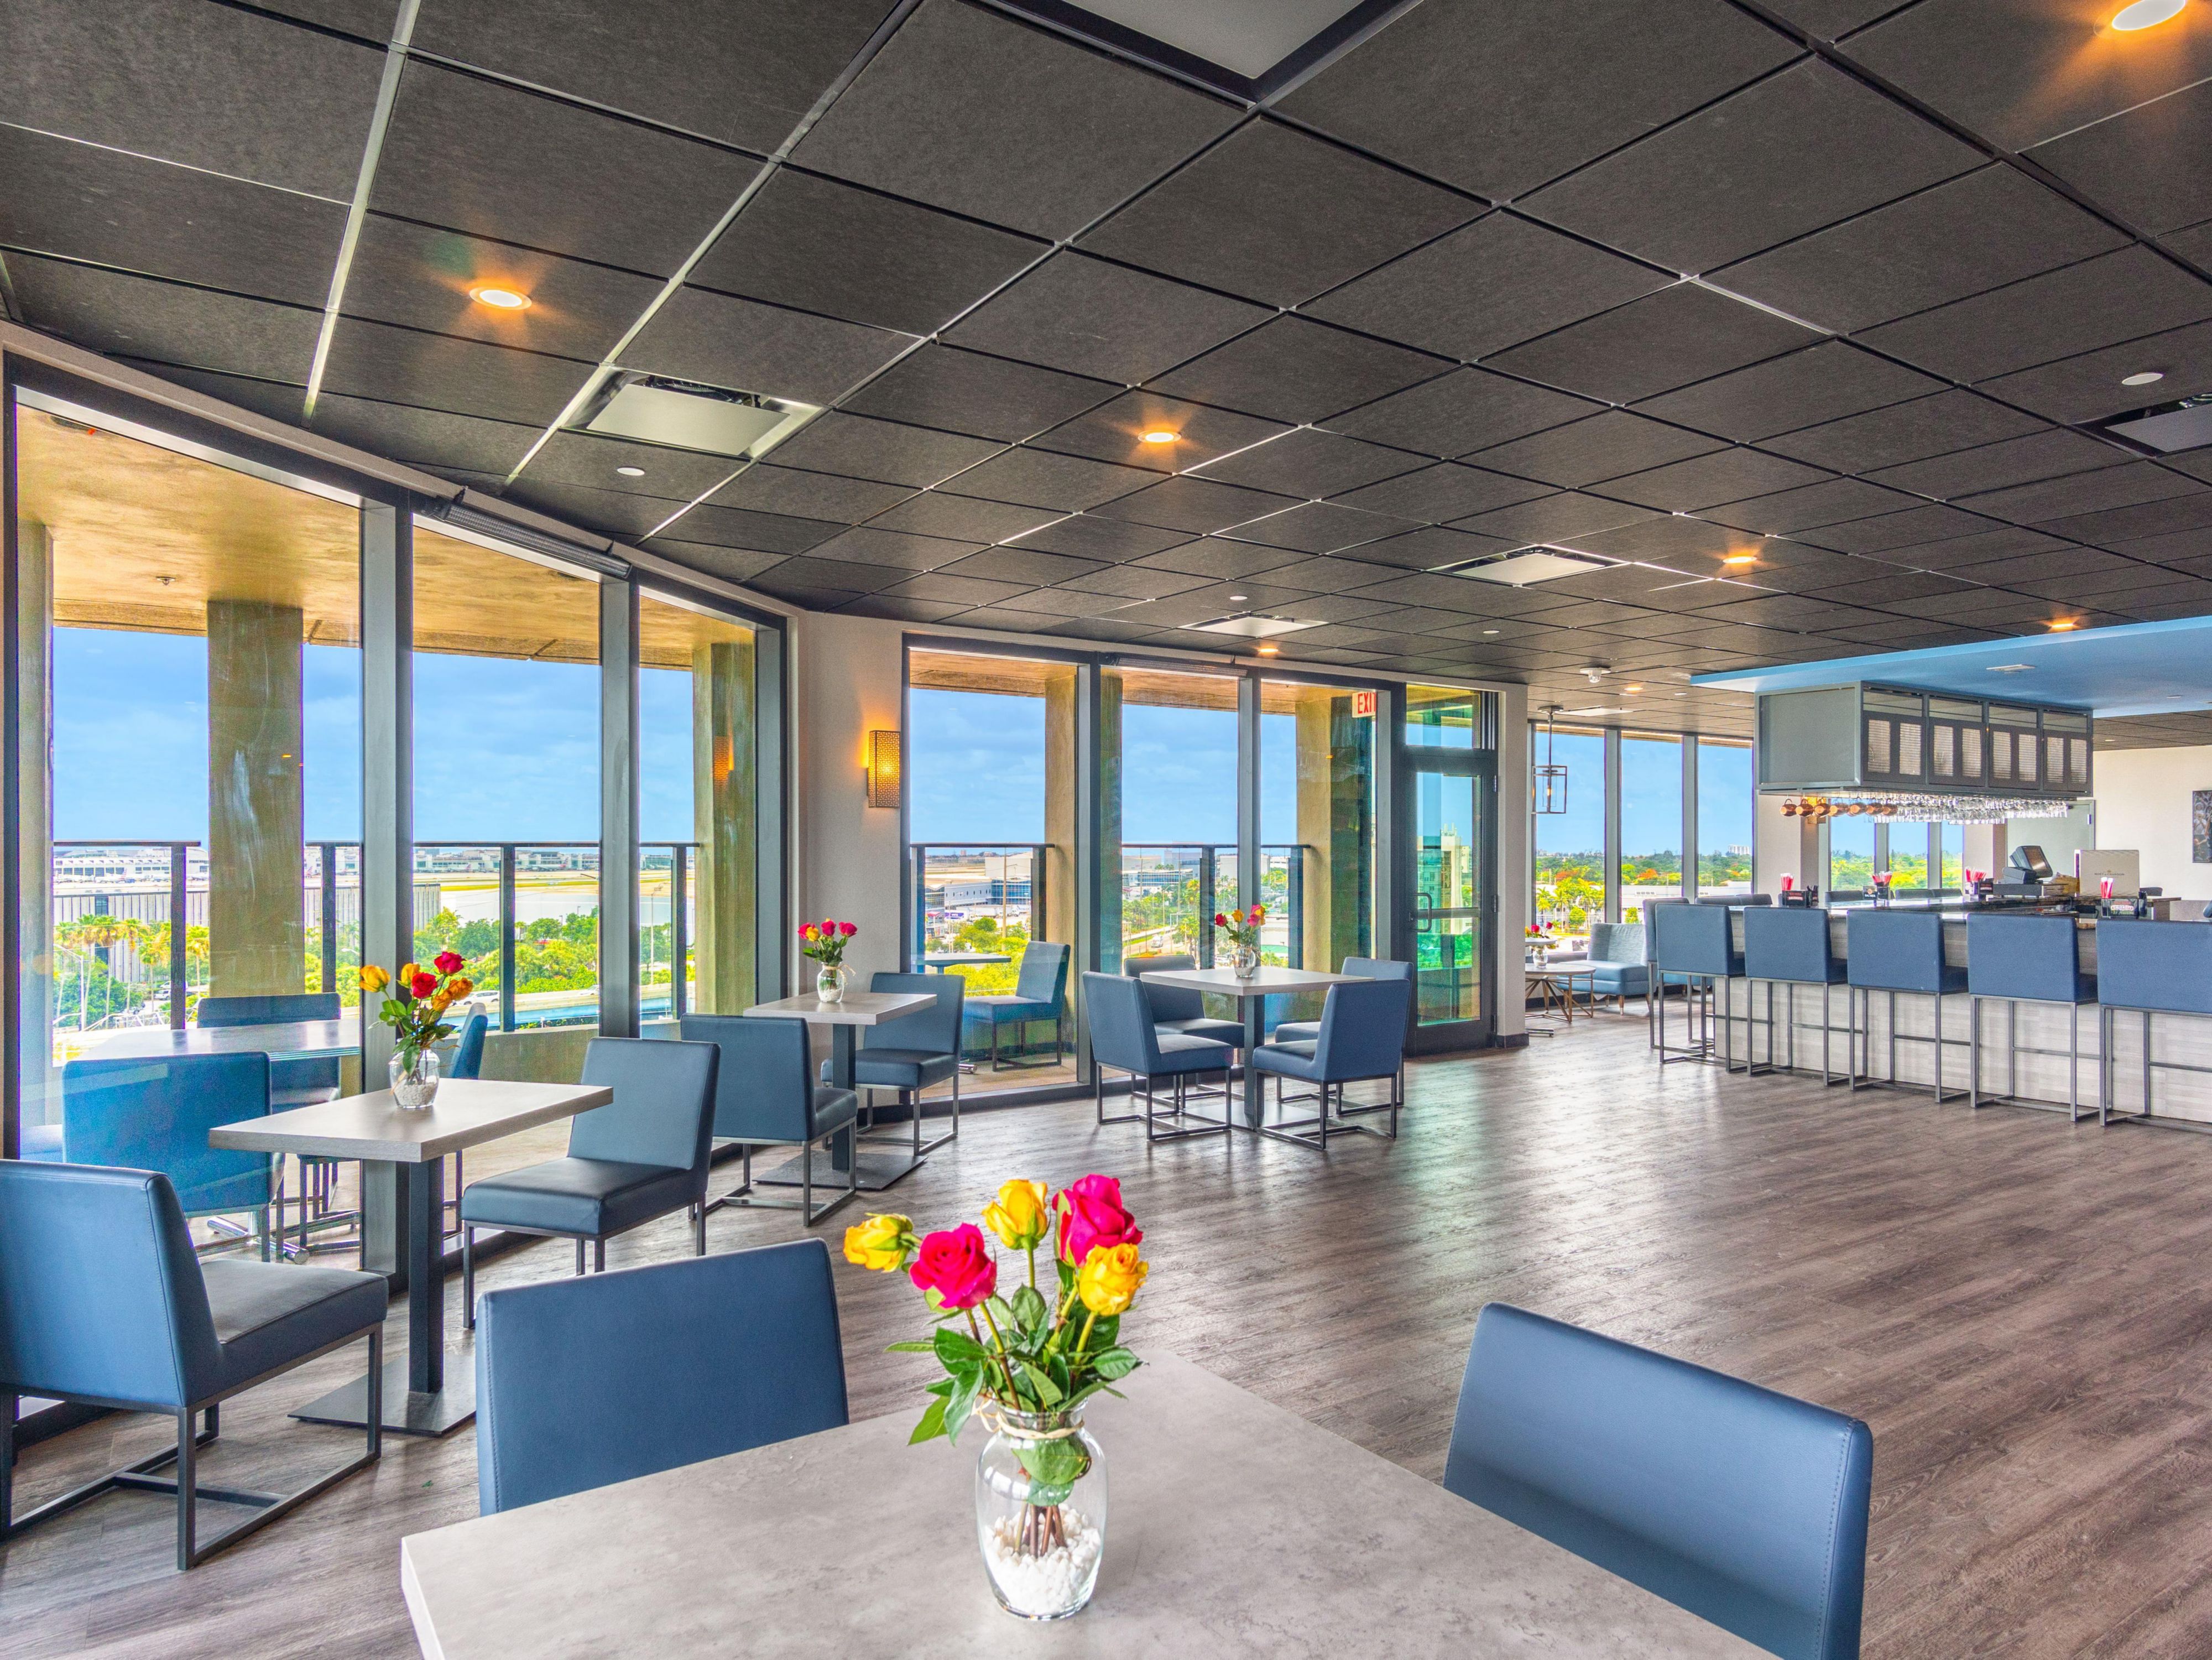 Take in the wonderful view and enjoy a meal or drink in our full service Restaurant and Bar